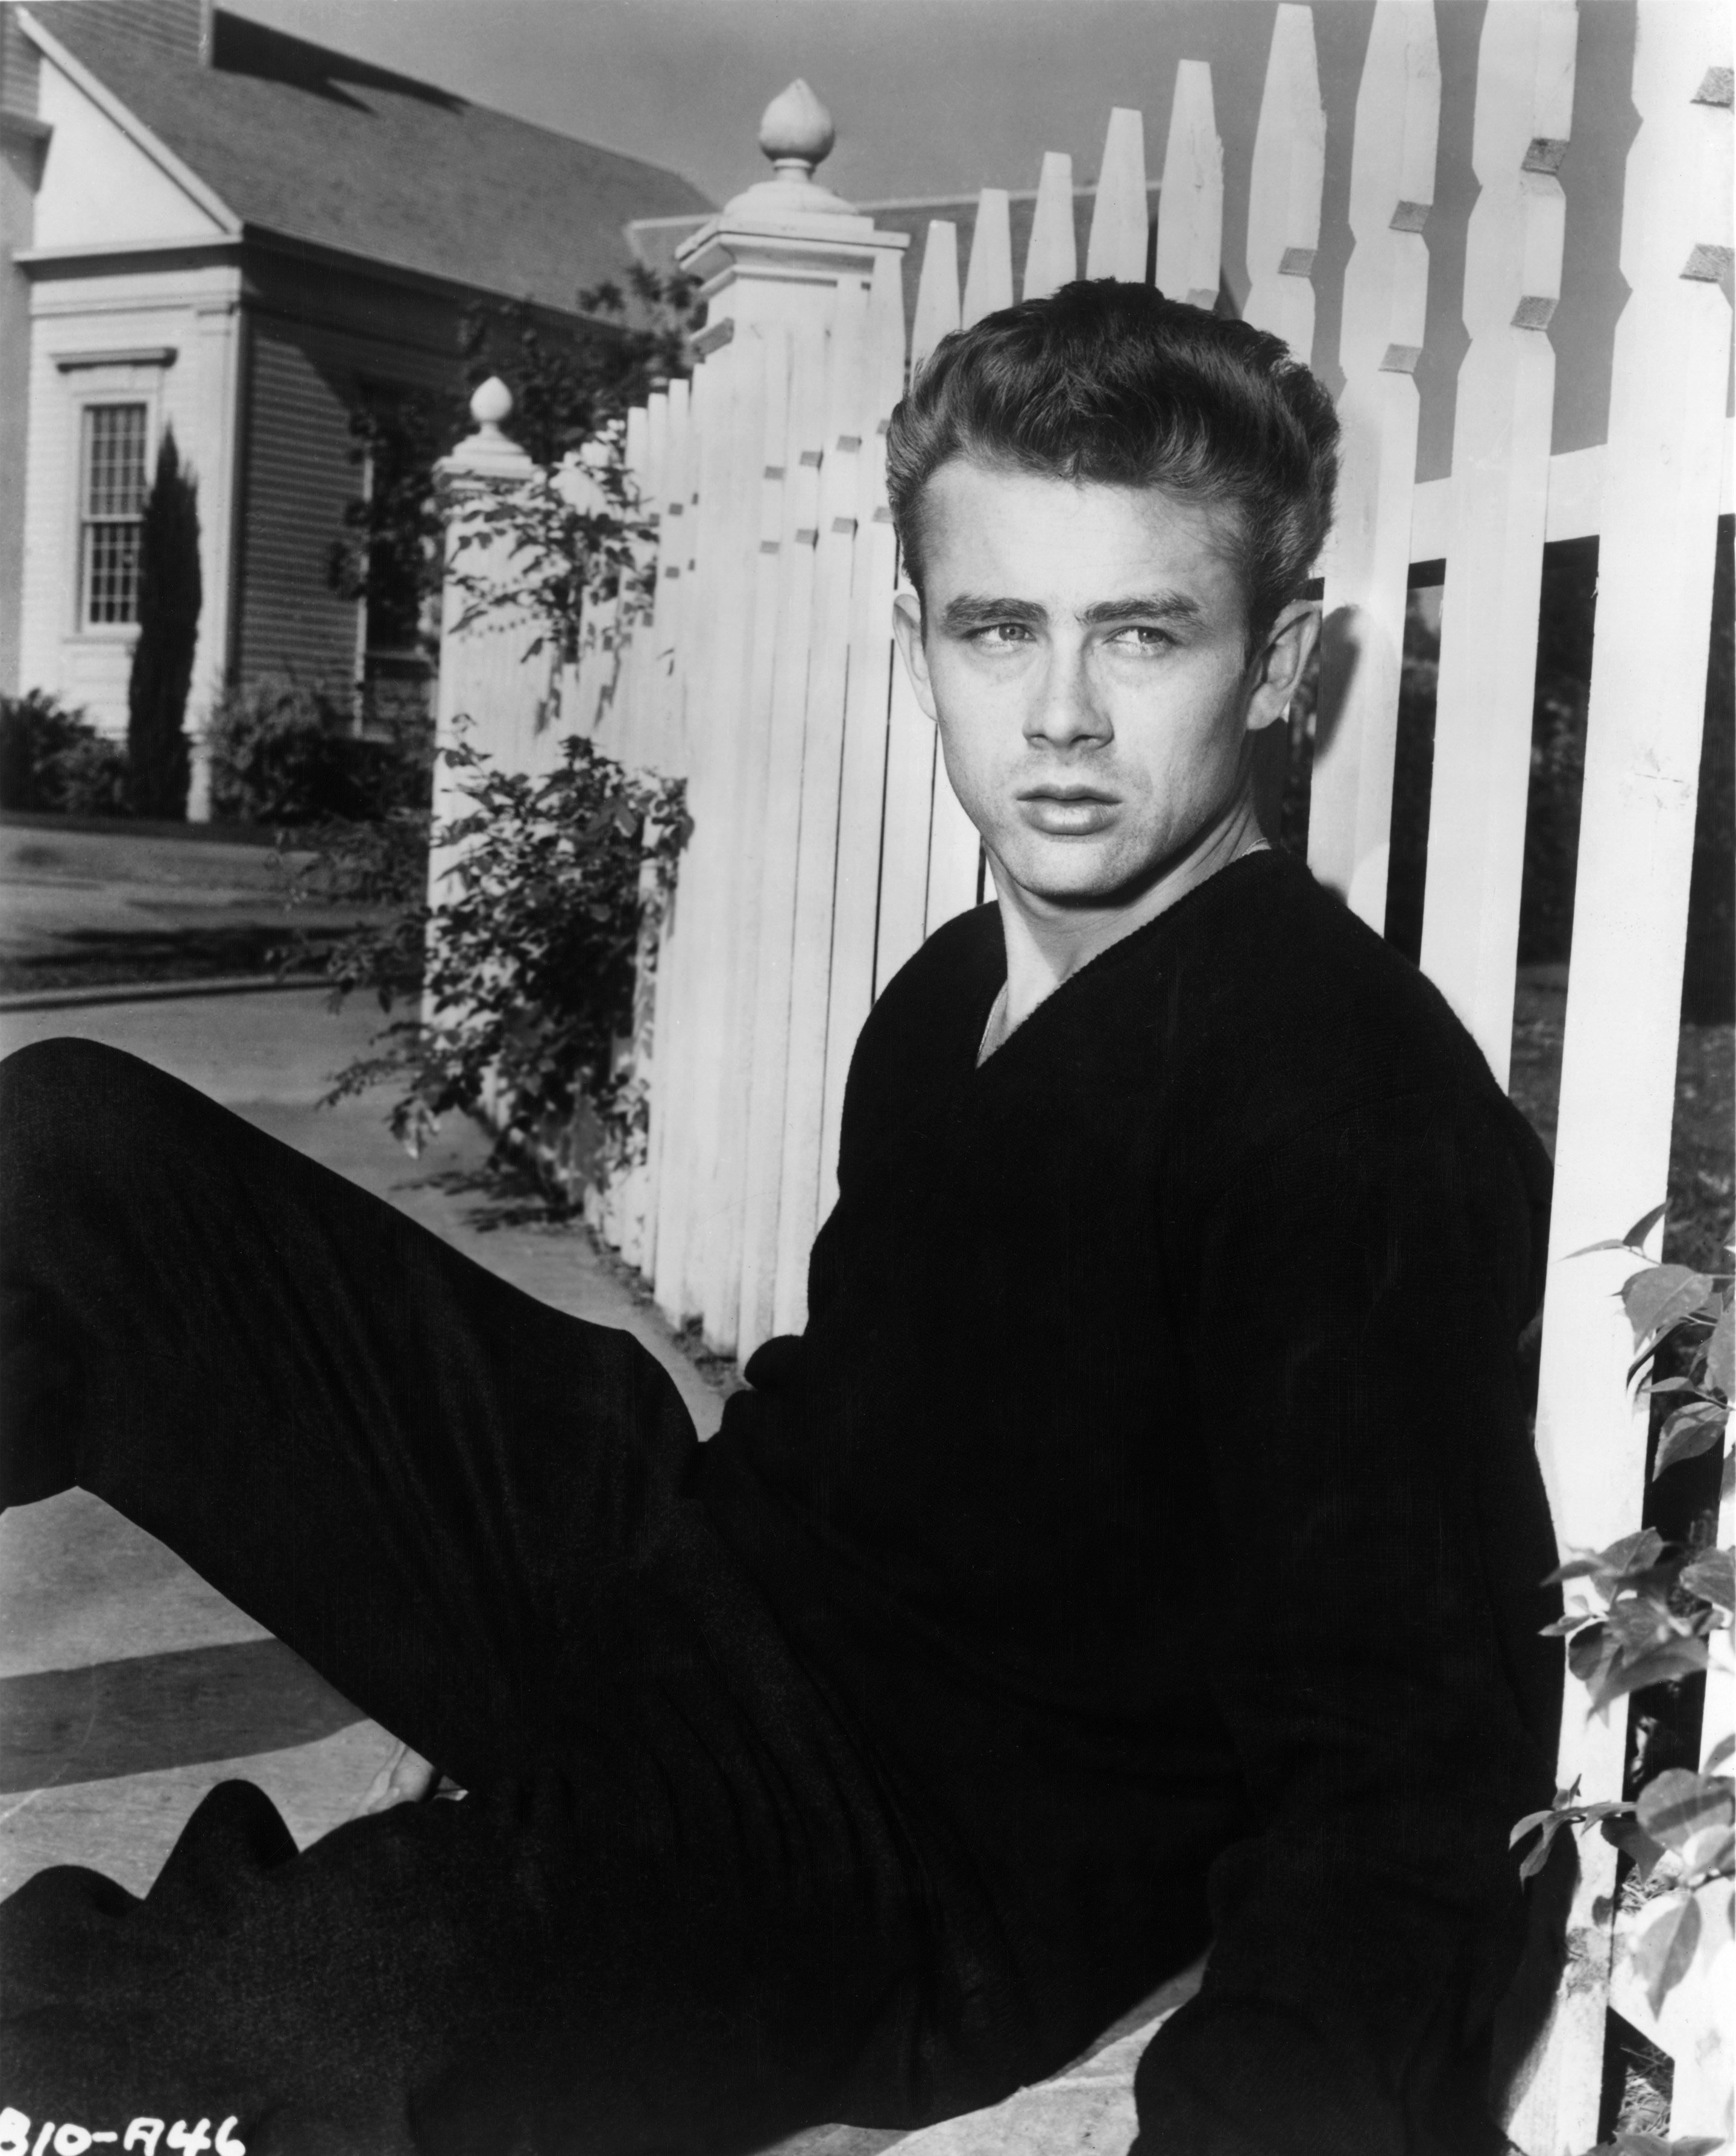  Actor James Dean poses for a photo on the set of the Warner Bros film 'East Of Eden' in 1954 in California. | Source: Getty Images